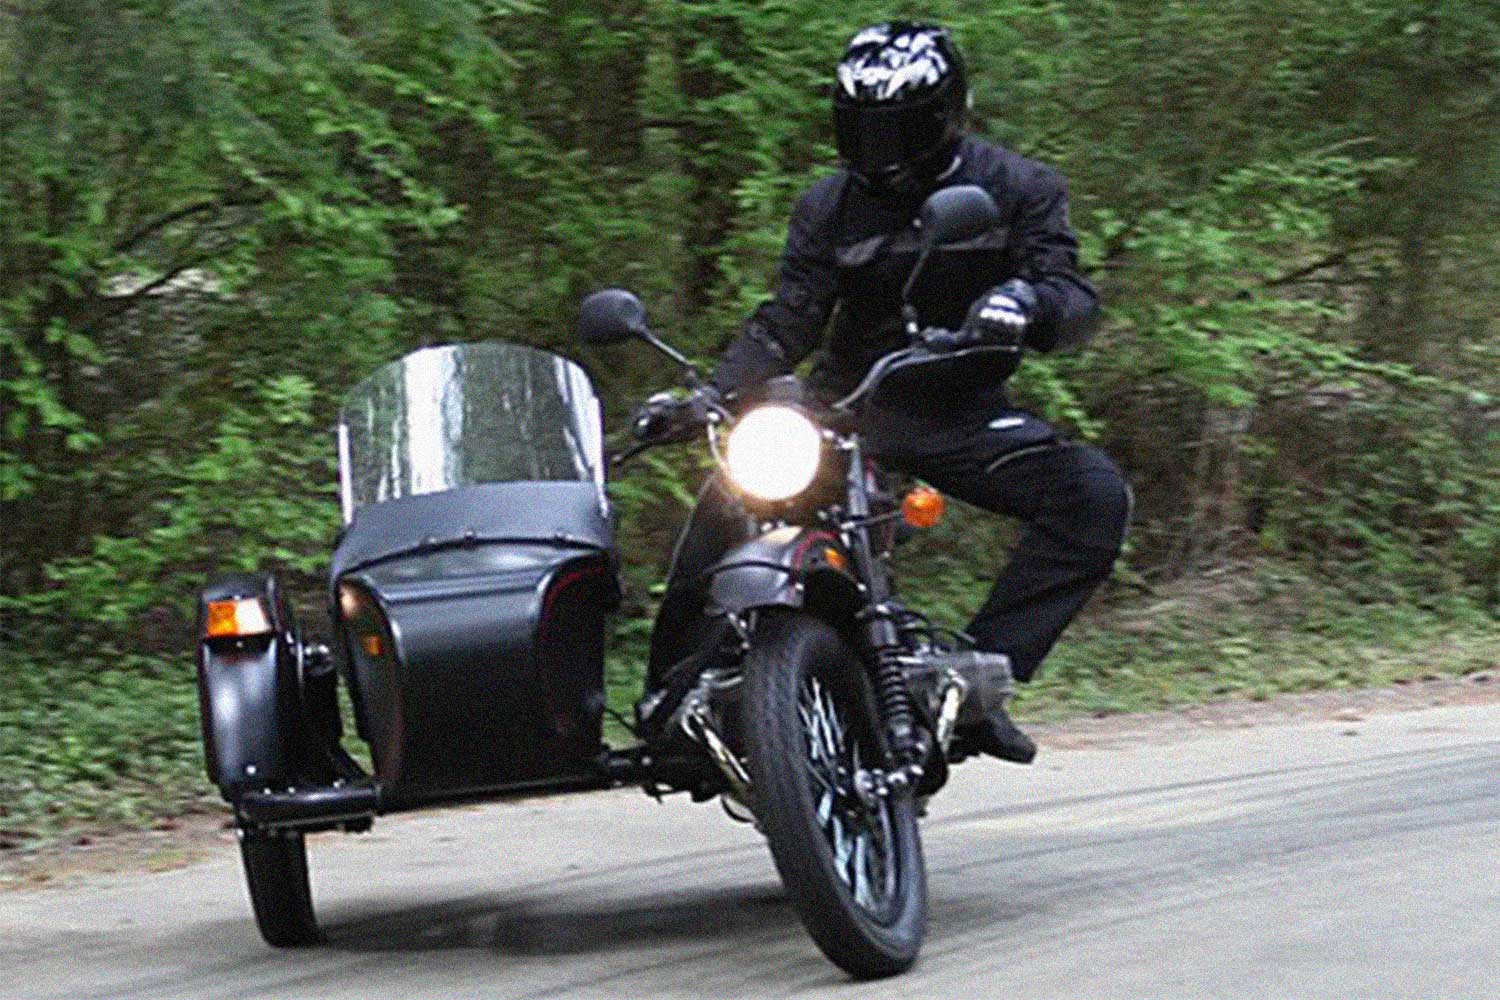 Automotive expert Basem Wasef on a Ural T sidecar motorcycle in 2009